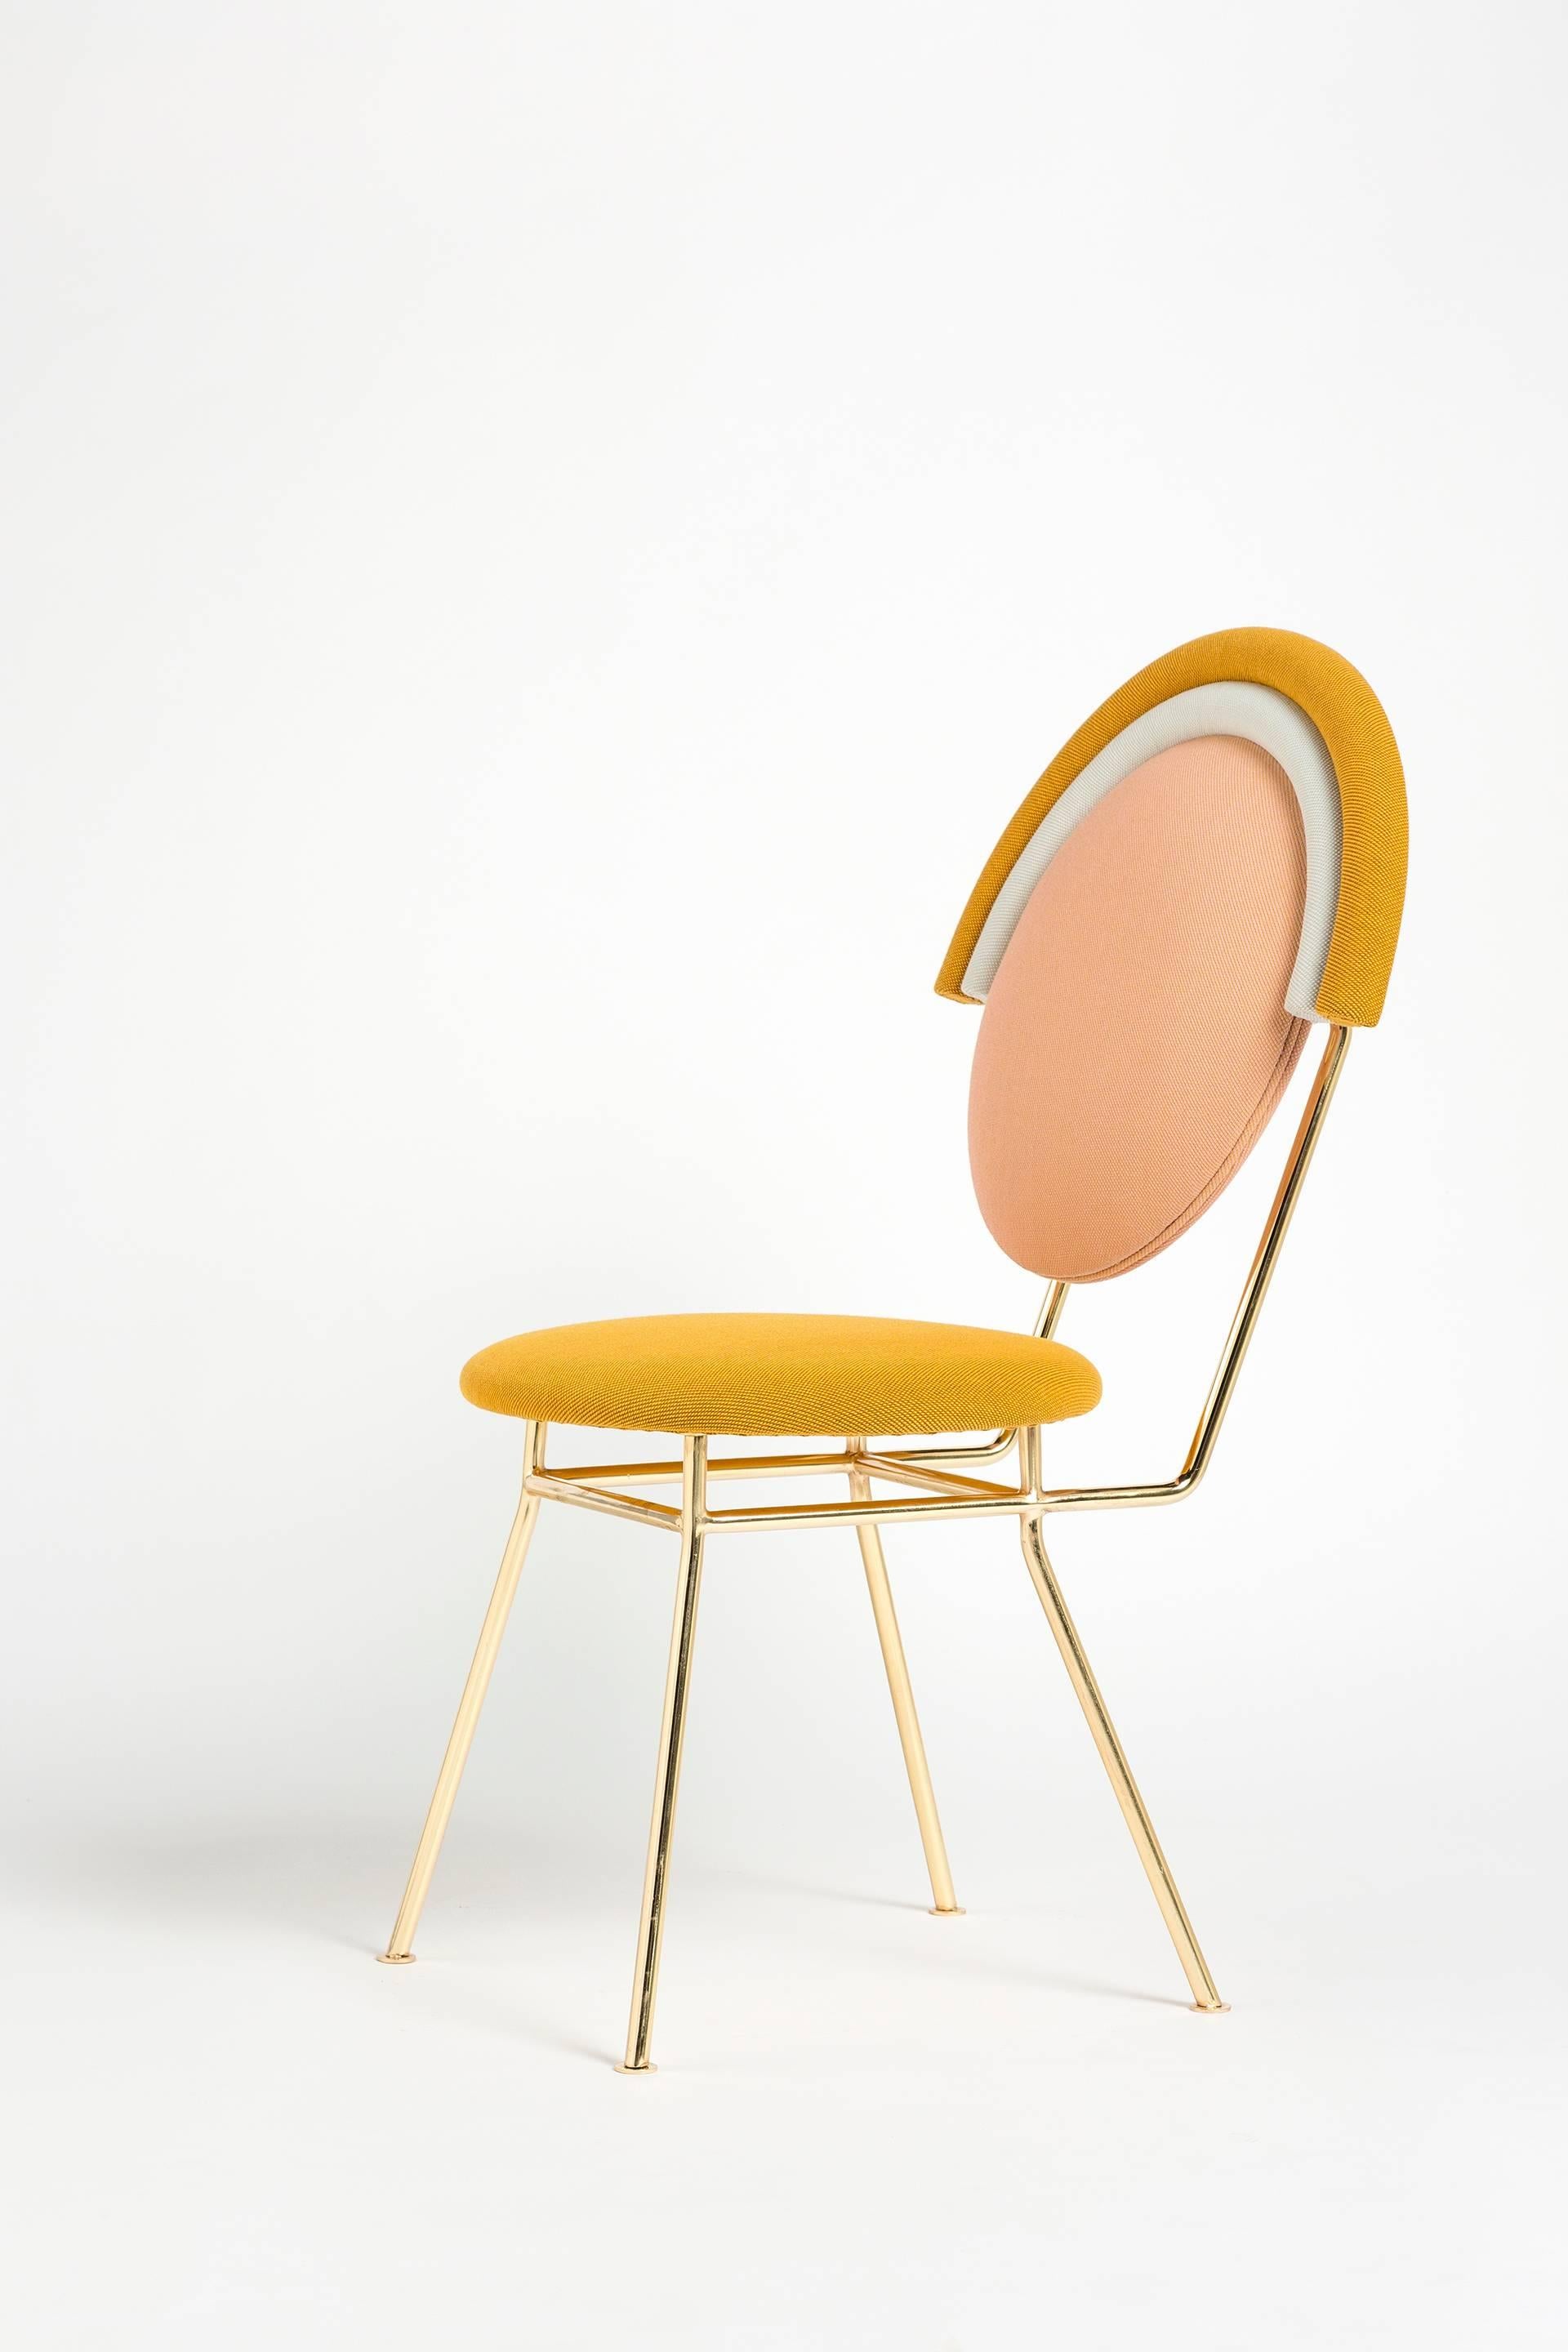 Contemporary Iris Chair with Brass Finished Legs by Merve Kahraman For Sale